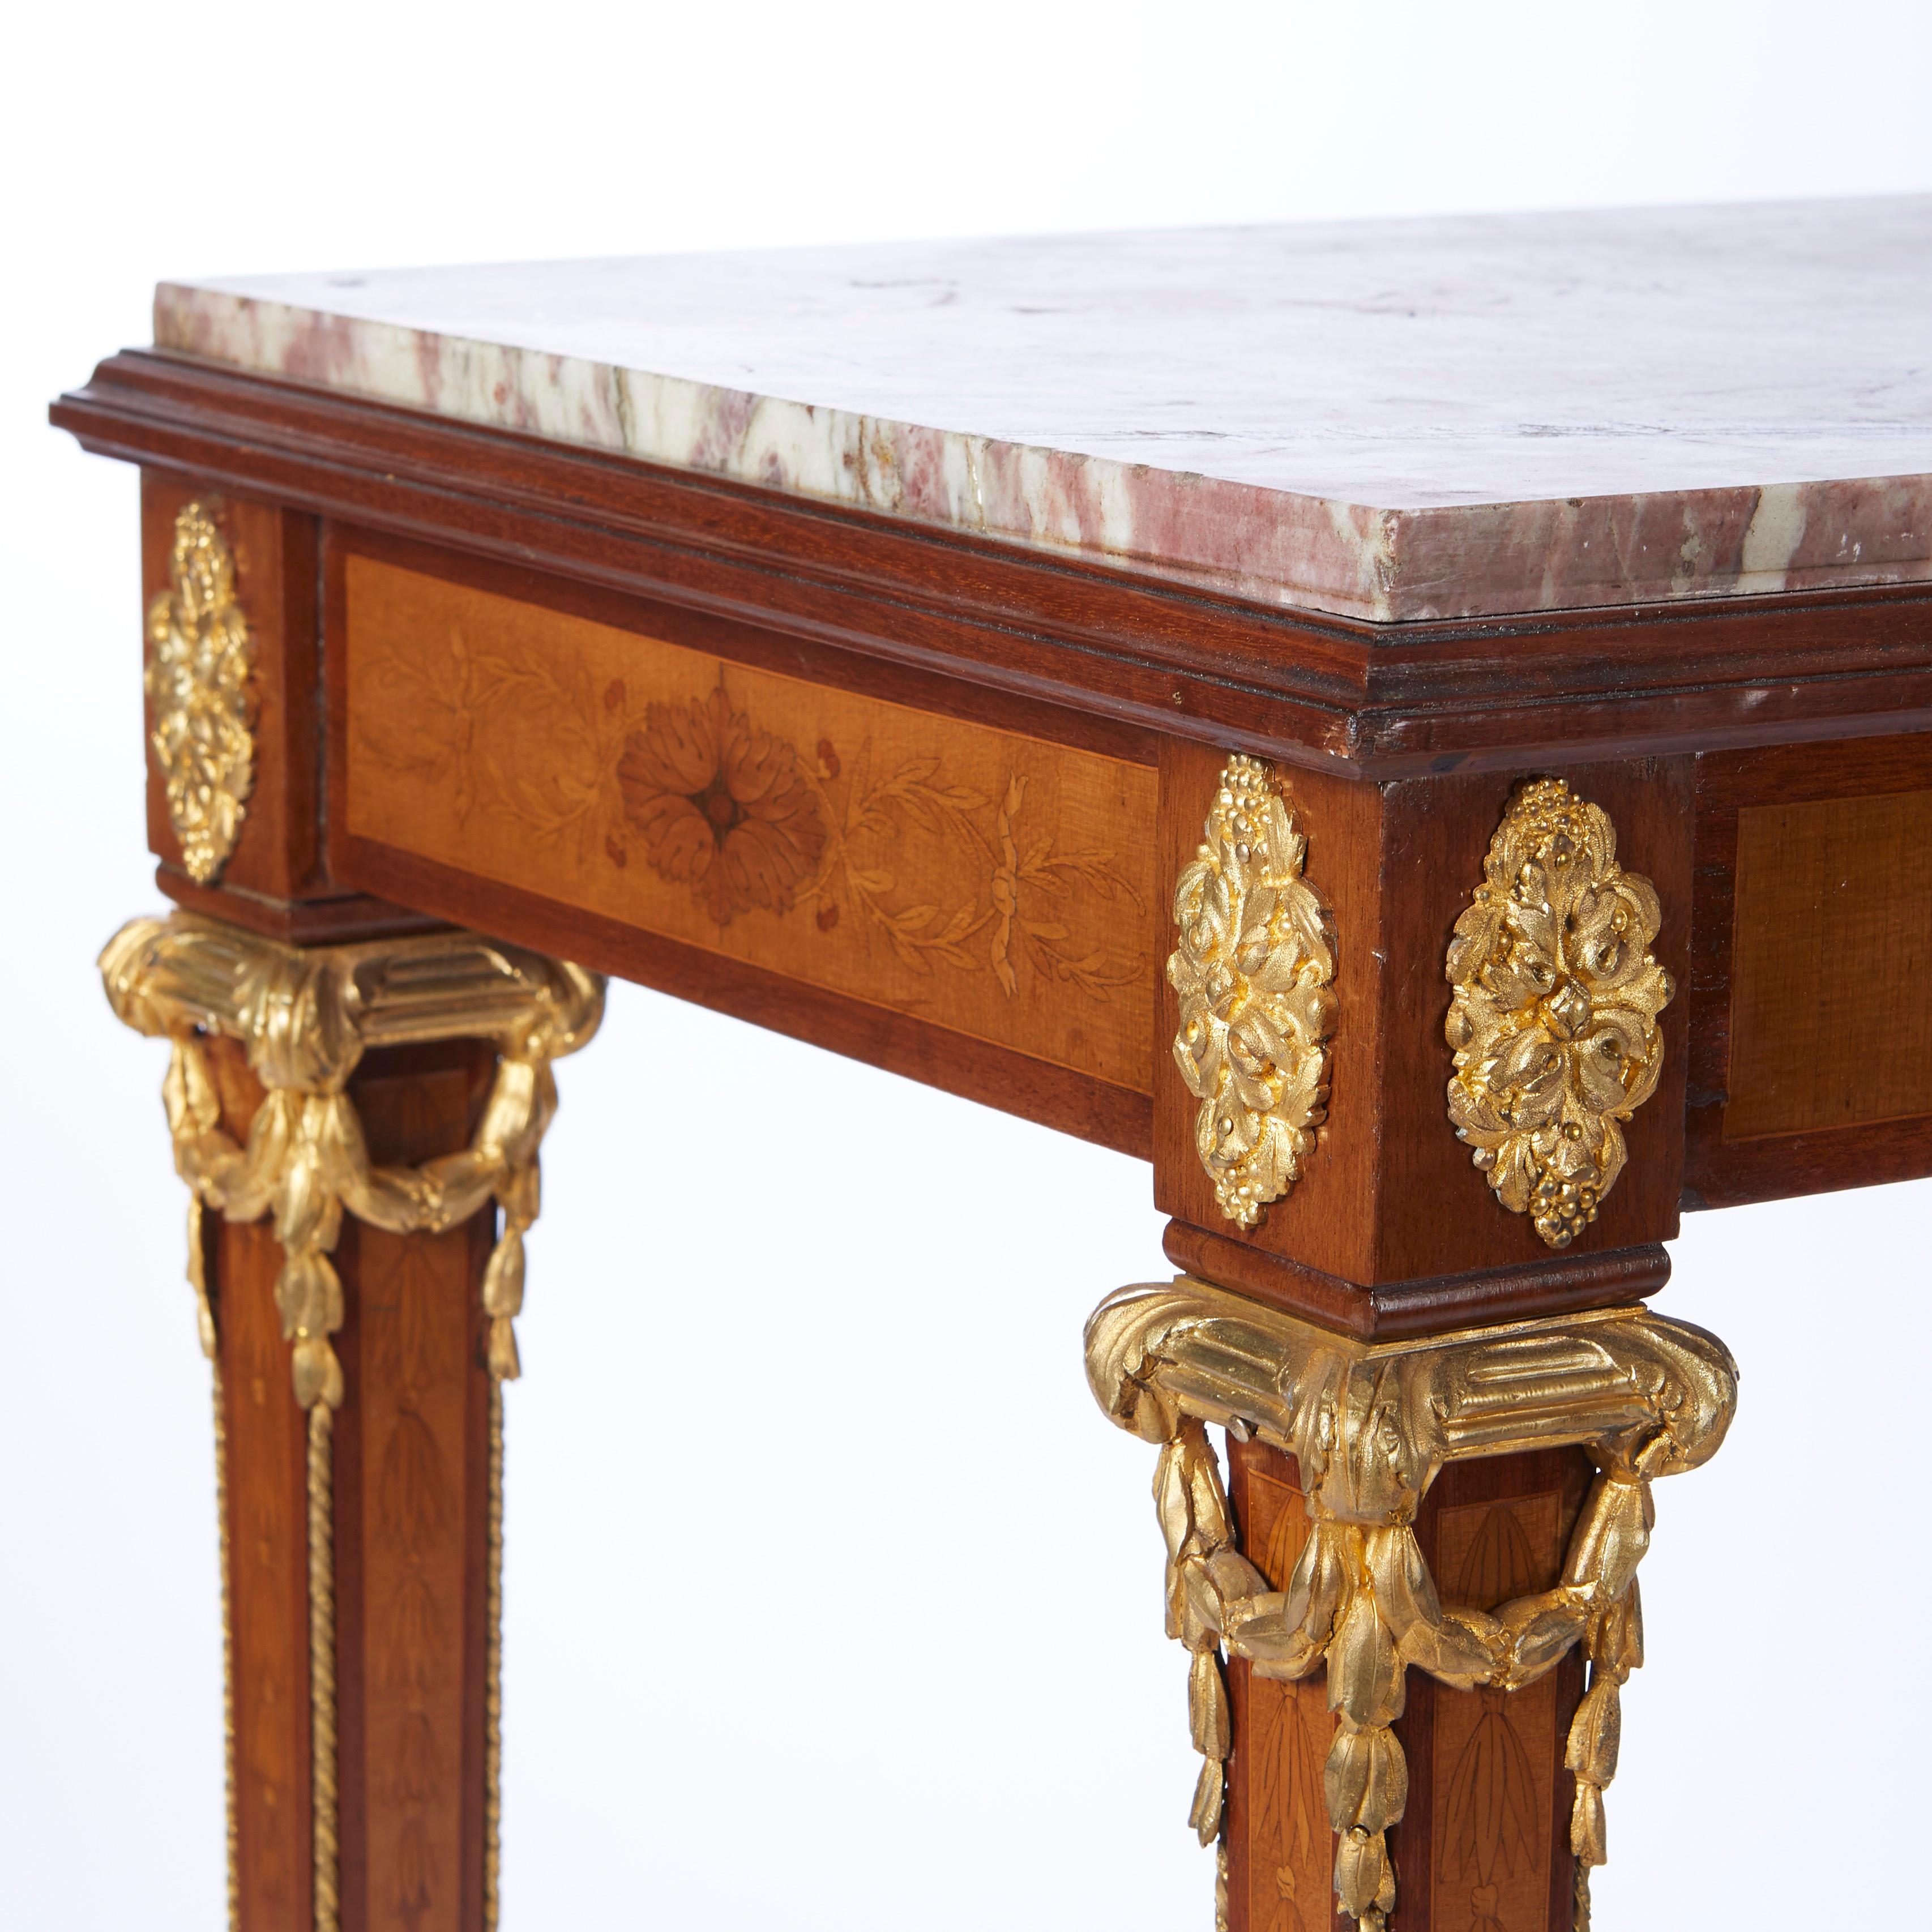 French Louis XVI style marquetry inlaid side table finished on 4 sides apron and legs have contrasting inlay and bronze mounts, top with inset violet colored marble marble. Circa 1920.